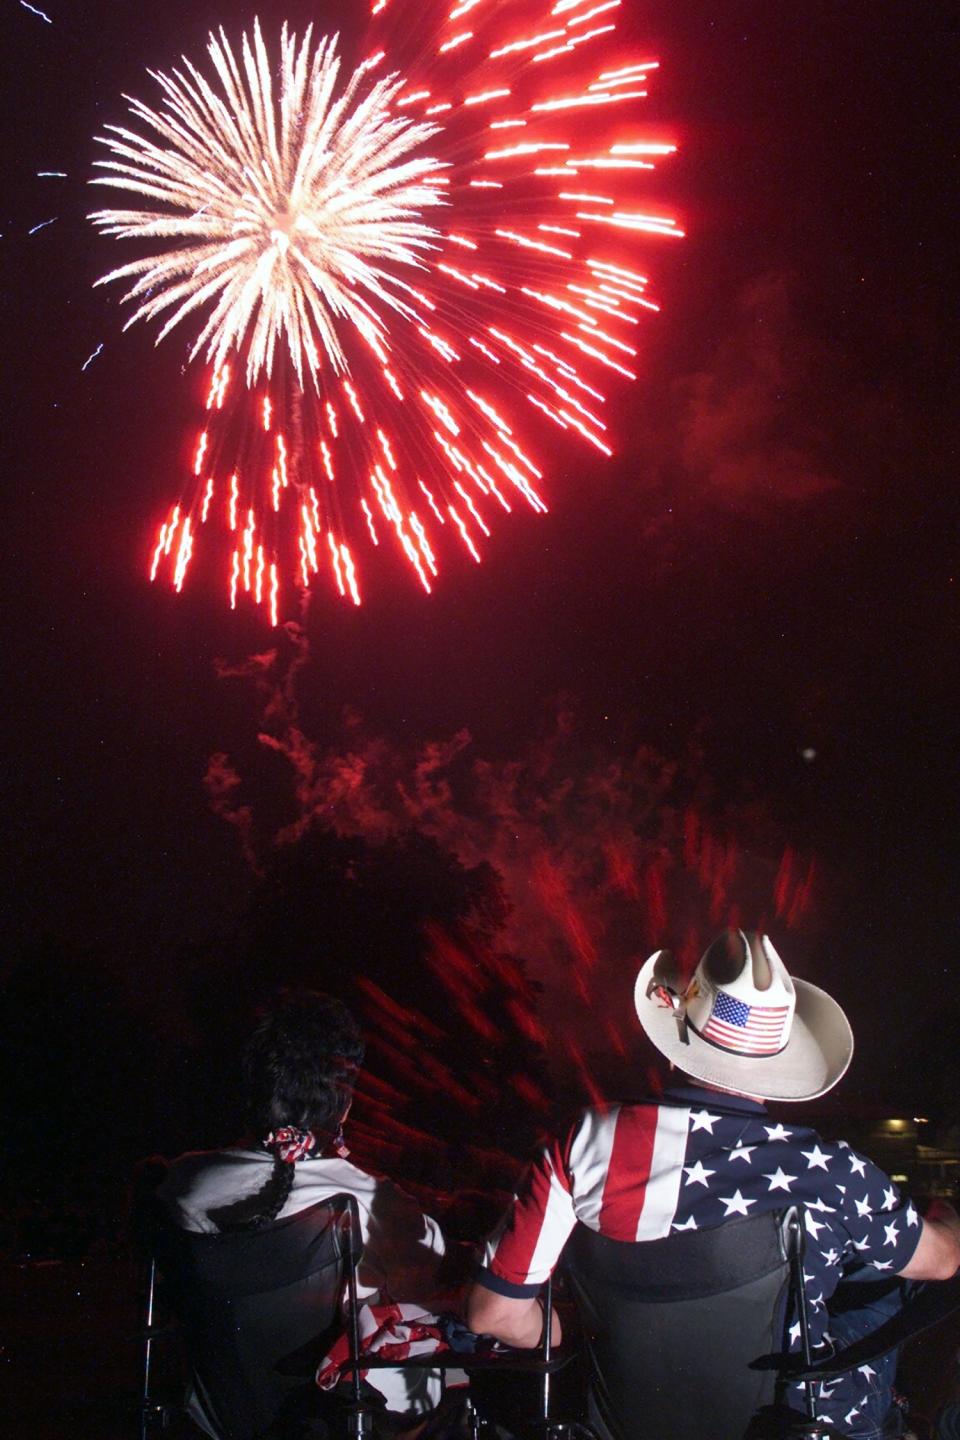 Arline Kellenbrun of Ridgefield and her husband Bob watch the fireworks display at Foschini Park in Hackensack , July 4, 2002. She is vice president of the American Legion Auxilary of Bergen County and he is vice county commander.